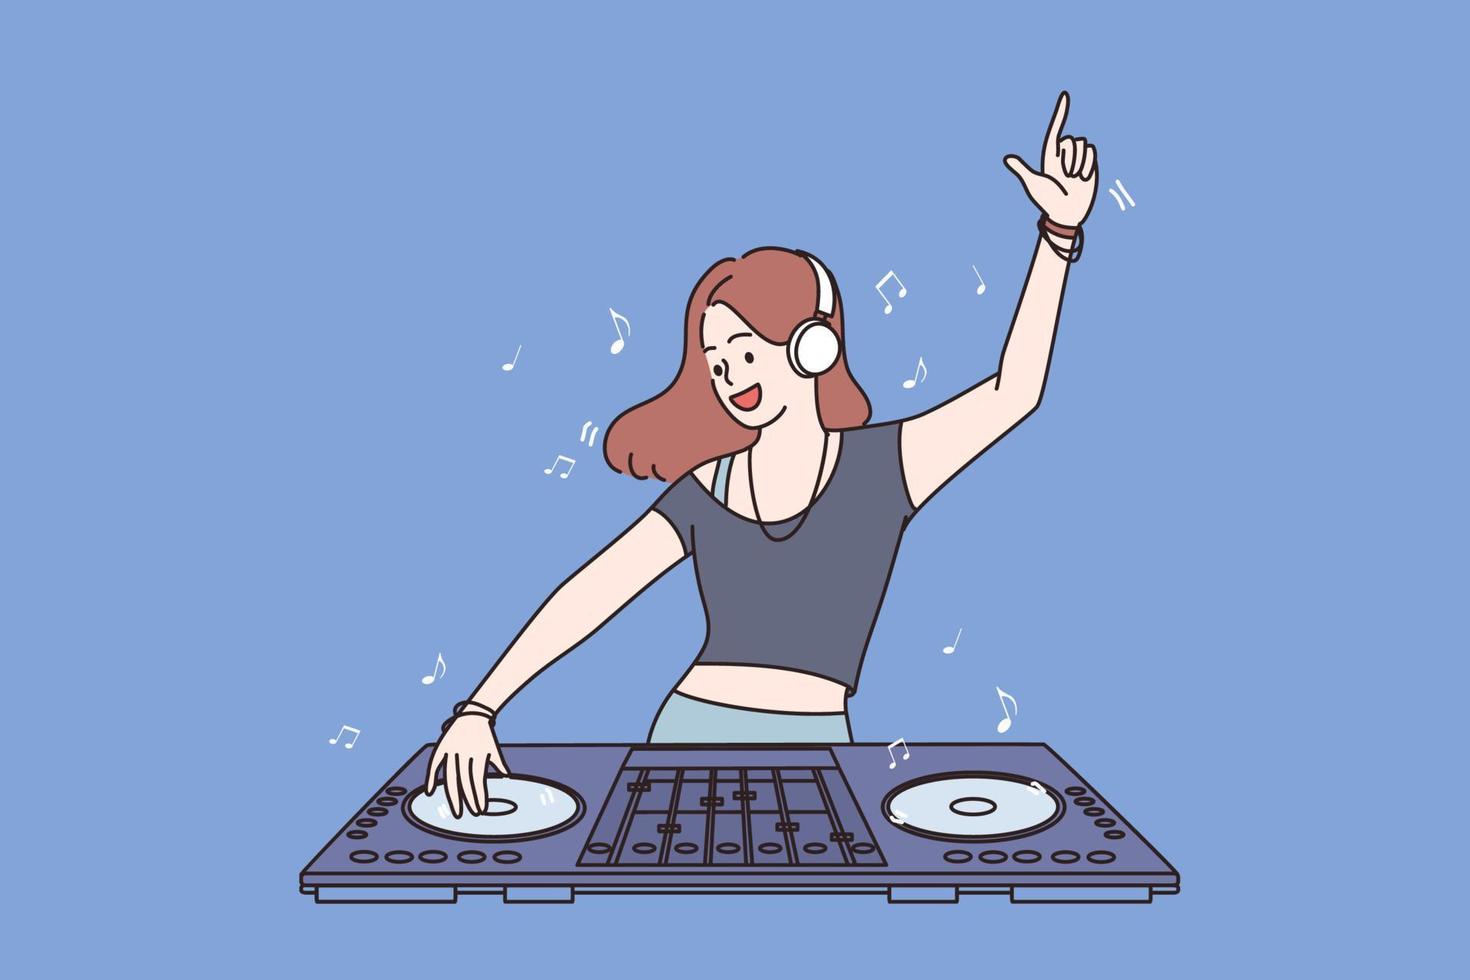 Working as dj in club concept. Young smiling girl teen cartoon character standing and making musical mix with special equipment and working as dj feeling fun vector illustration